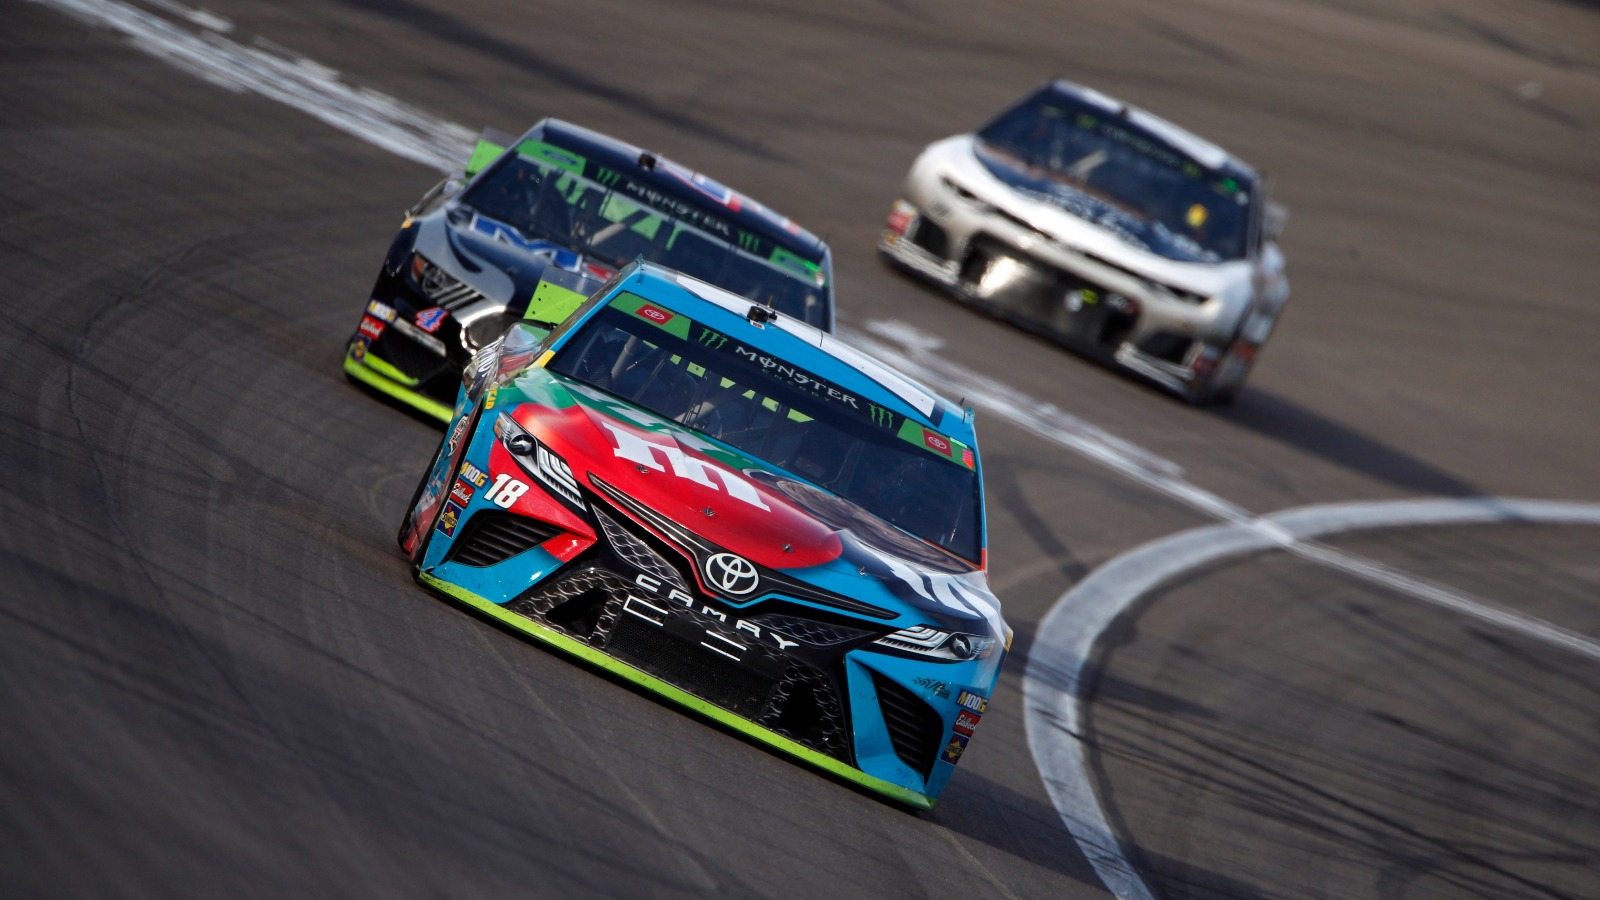 How to Watch NASCAR 2020 South Point 400 Without Cable